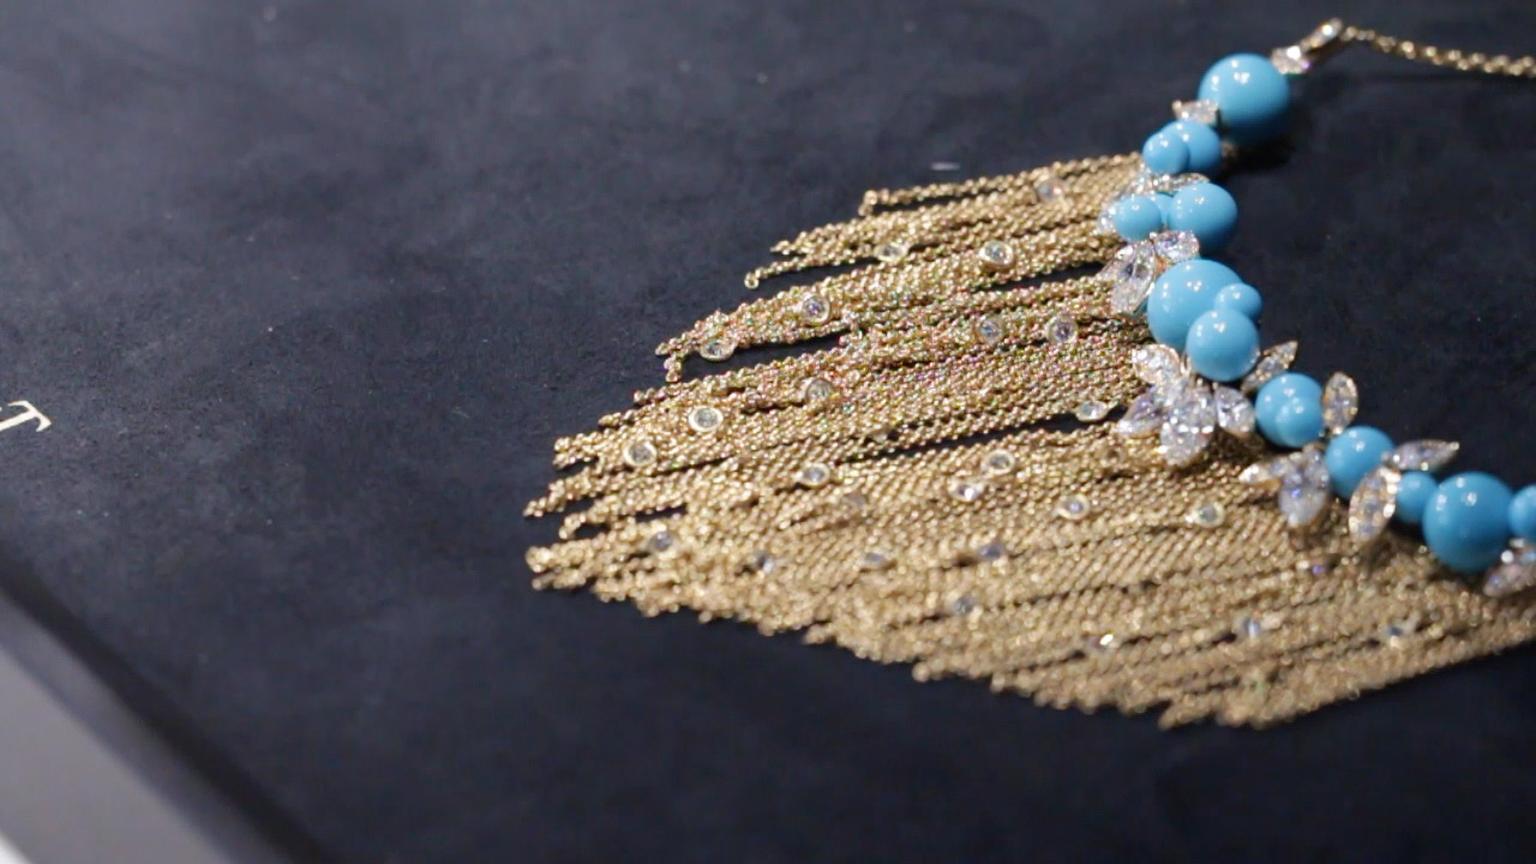 Extremely Piaget necklace with interspersed brilliant-cut diamonds amongst gold tassels hanging from turquoise beads and pear-shaped diamonds.